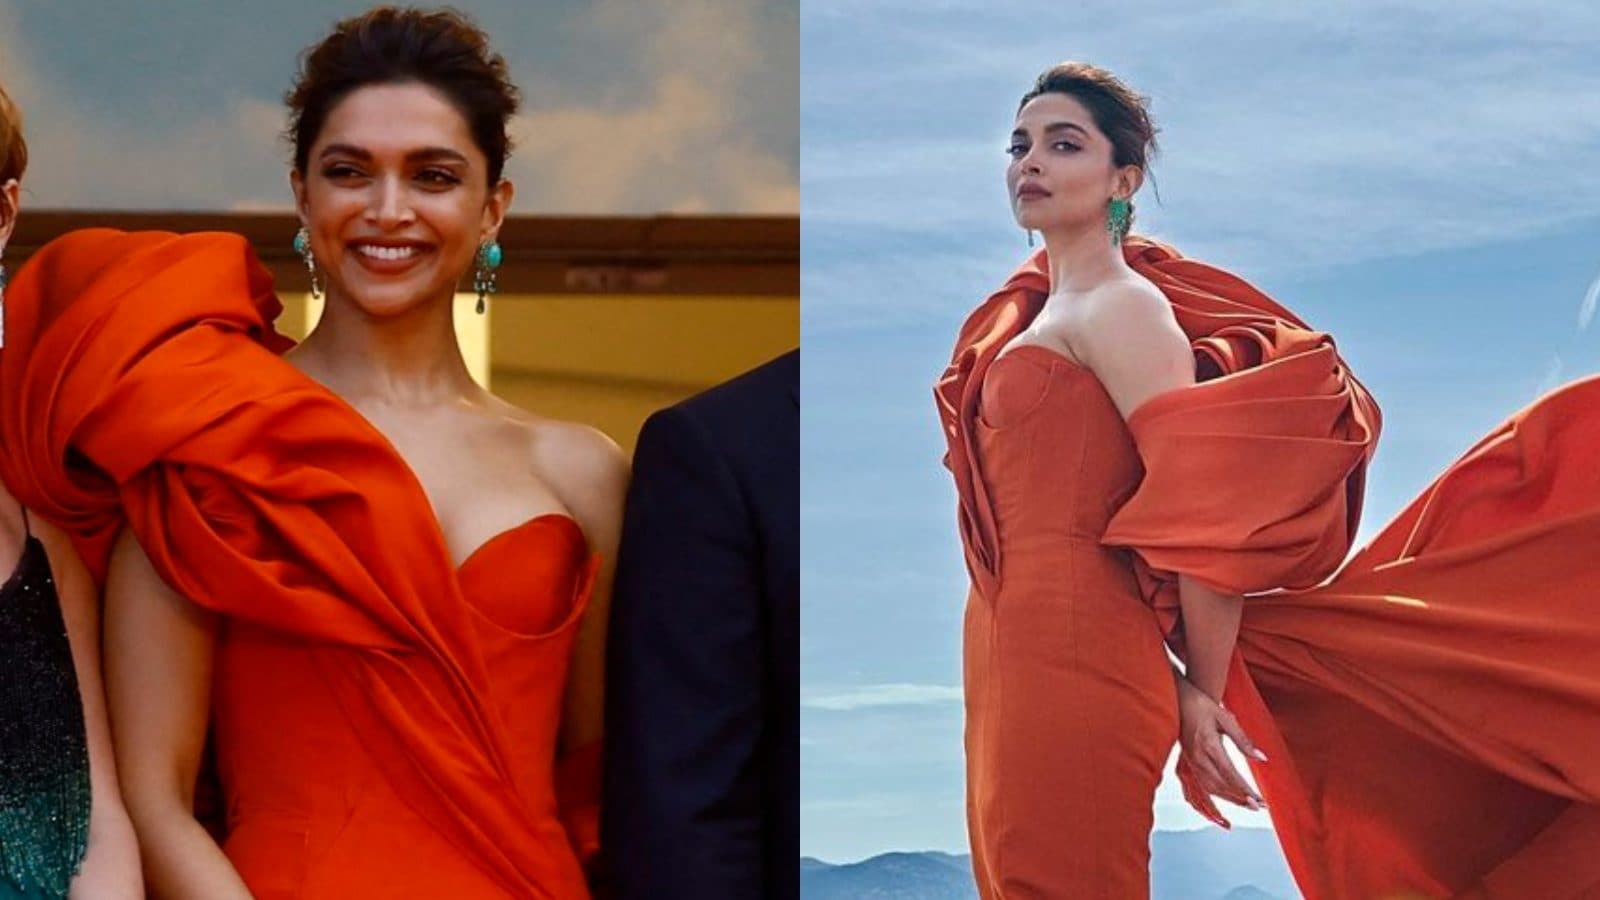 HELLO! India - Deepika Padukone looked gorgeous in an off-shoulder pale  pink gown at the L.A. premiere of XXX: The Return of Xander Cage #Hollywood  #Bollywood #DeepikaPadukone #RedCarpet #Beautiful #Actress #Fashion  #LosAngeles #